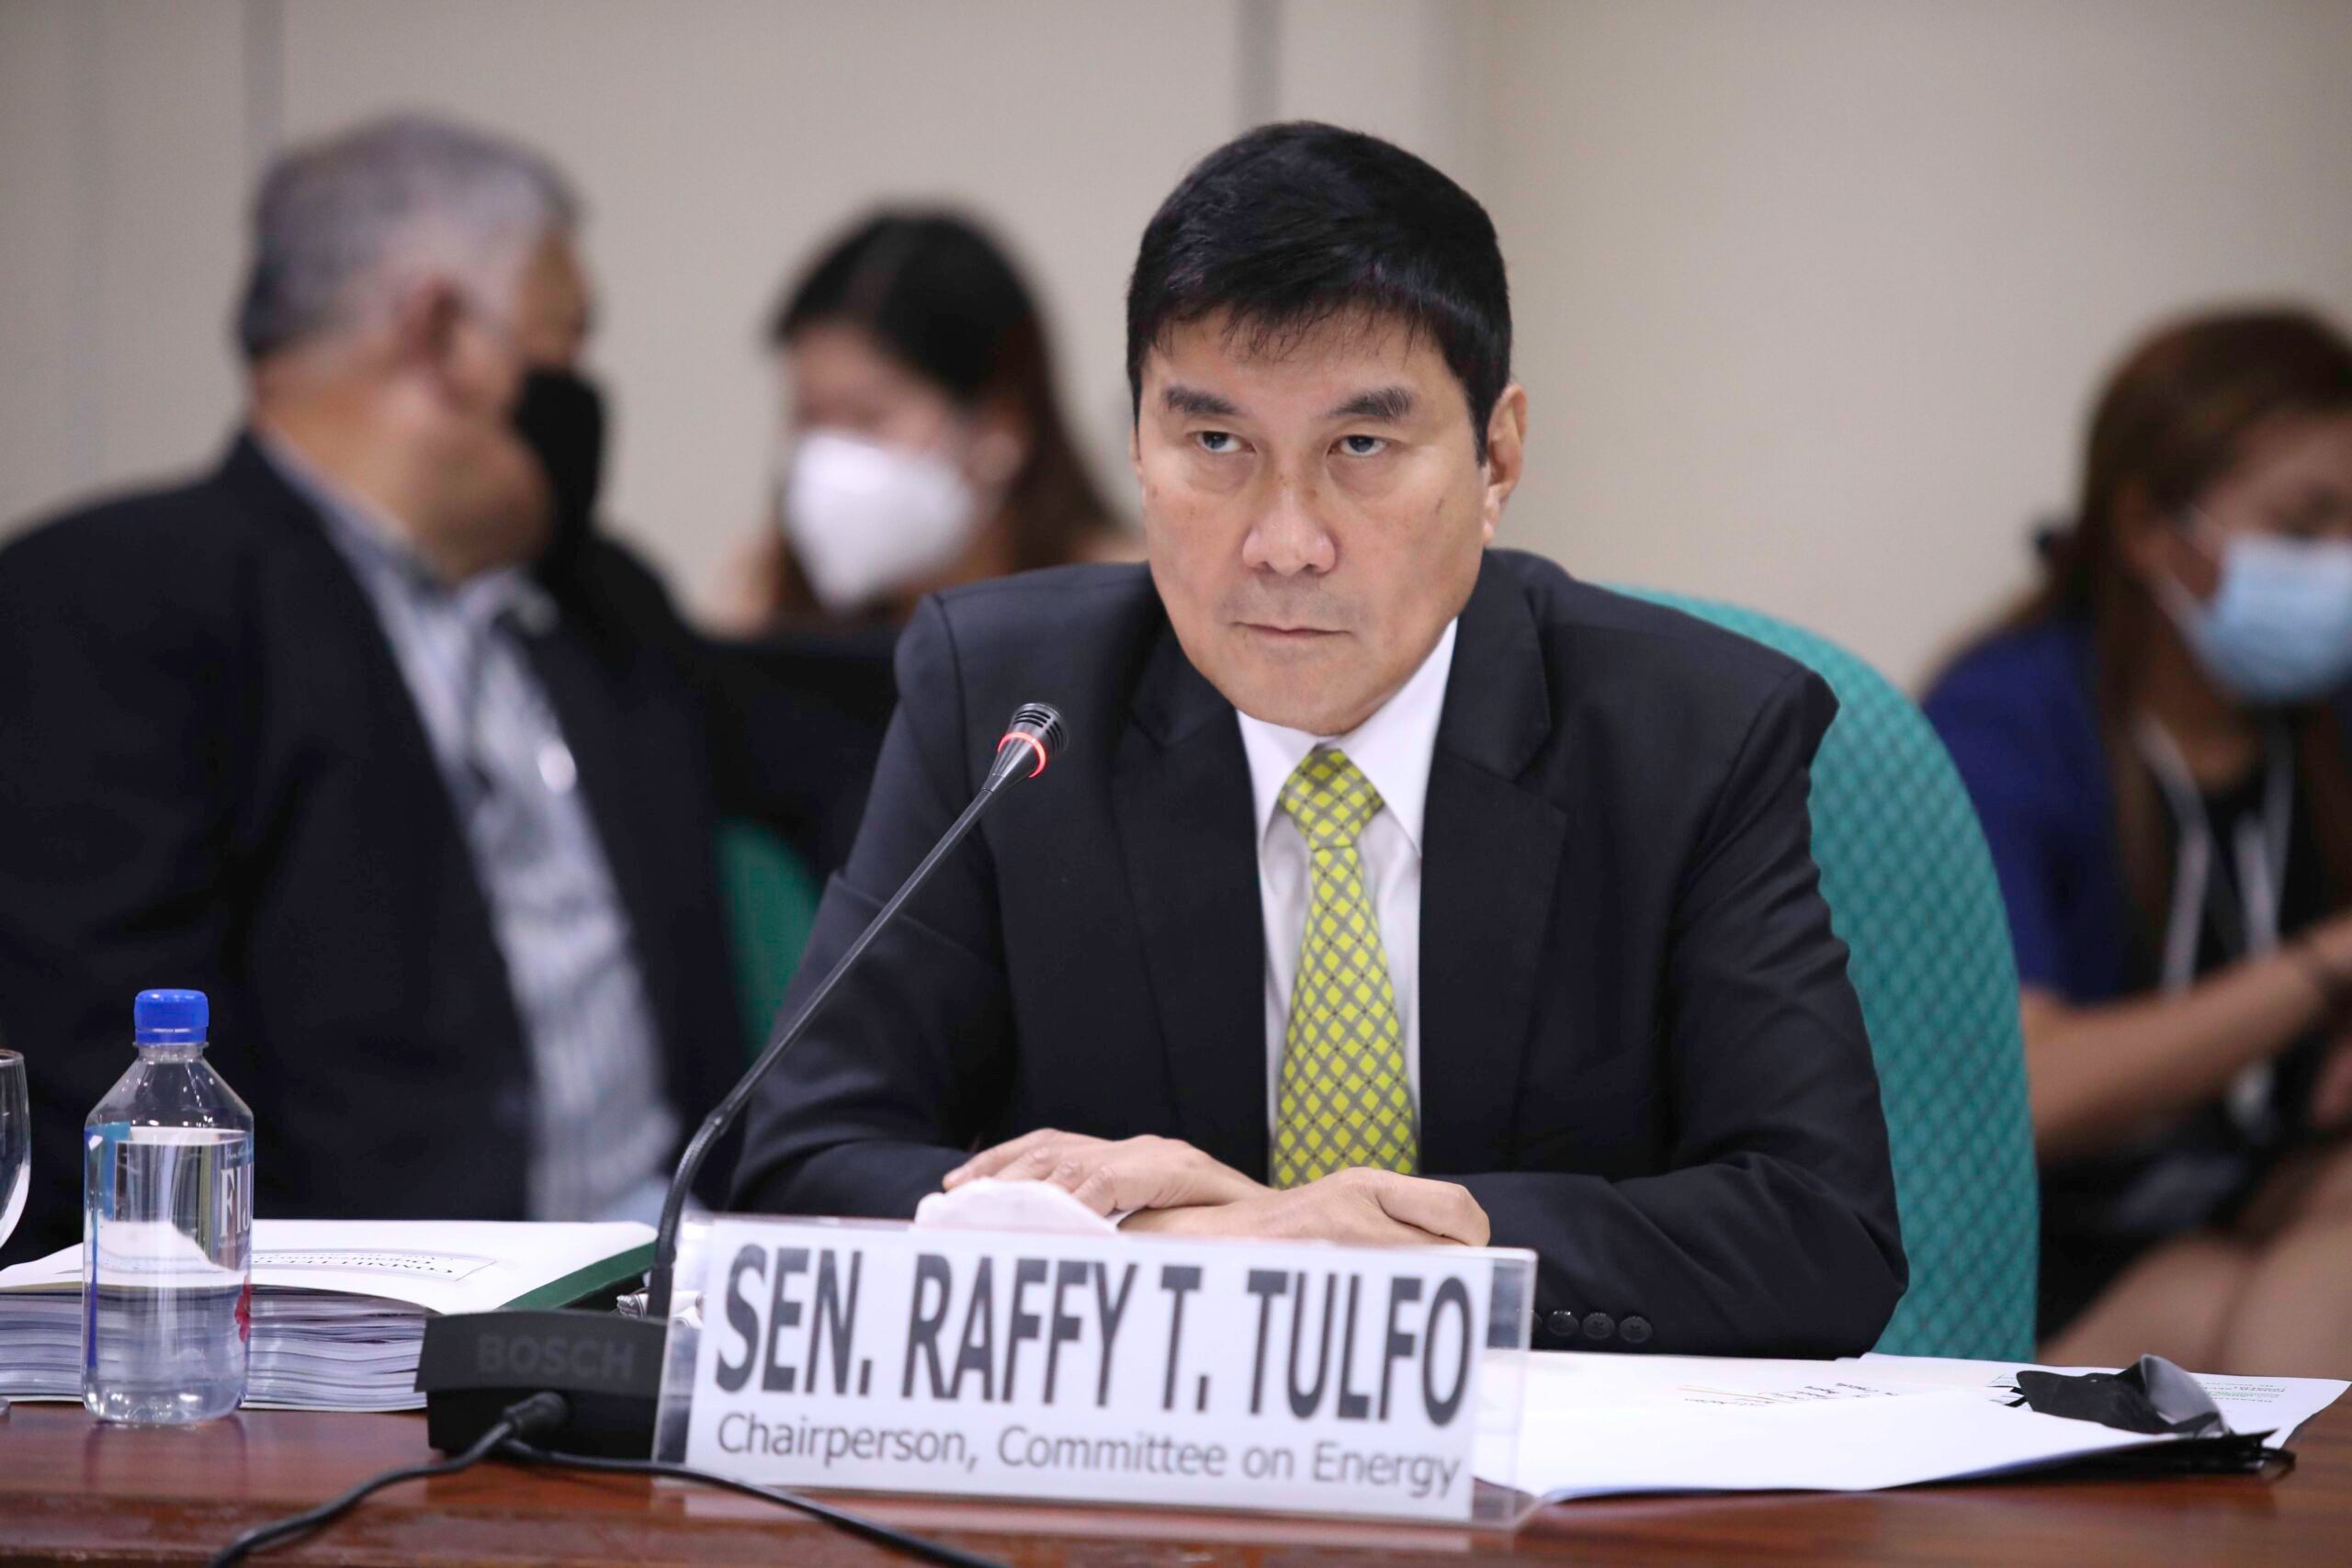 Tulfo: Ok decriminalize libel, but not for those who spread disinformation